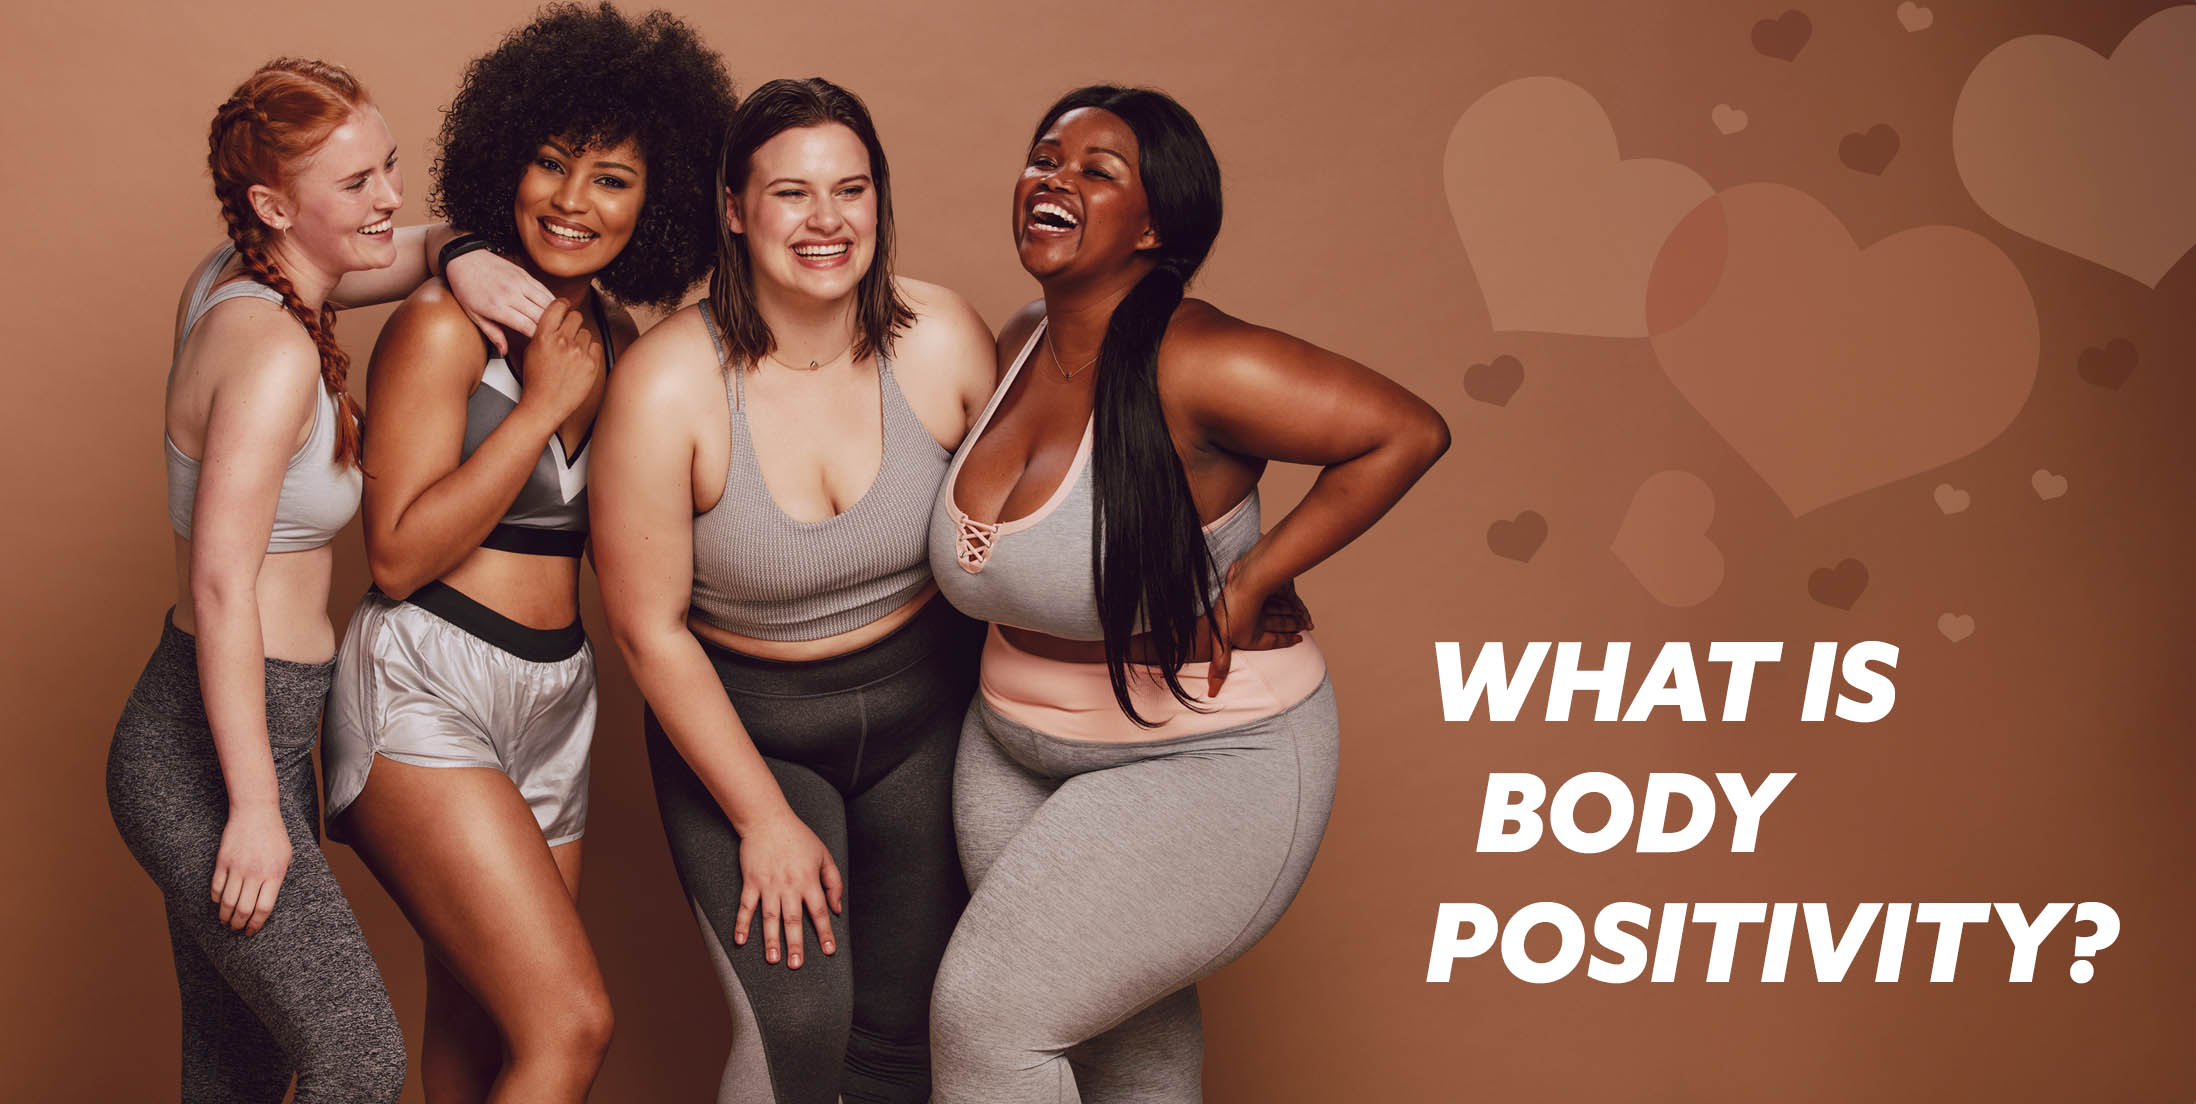 What is Body Positivity?